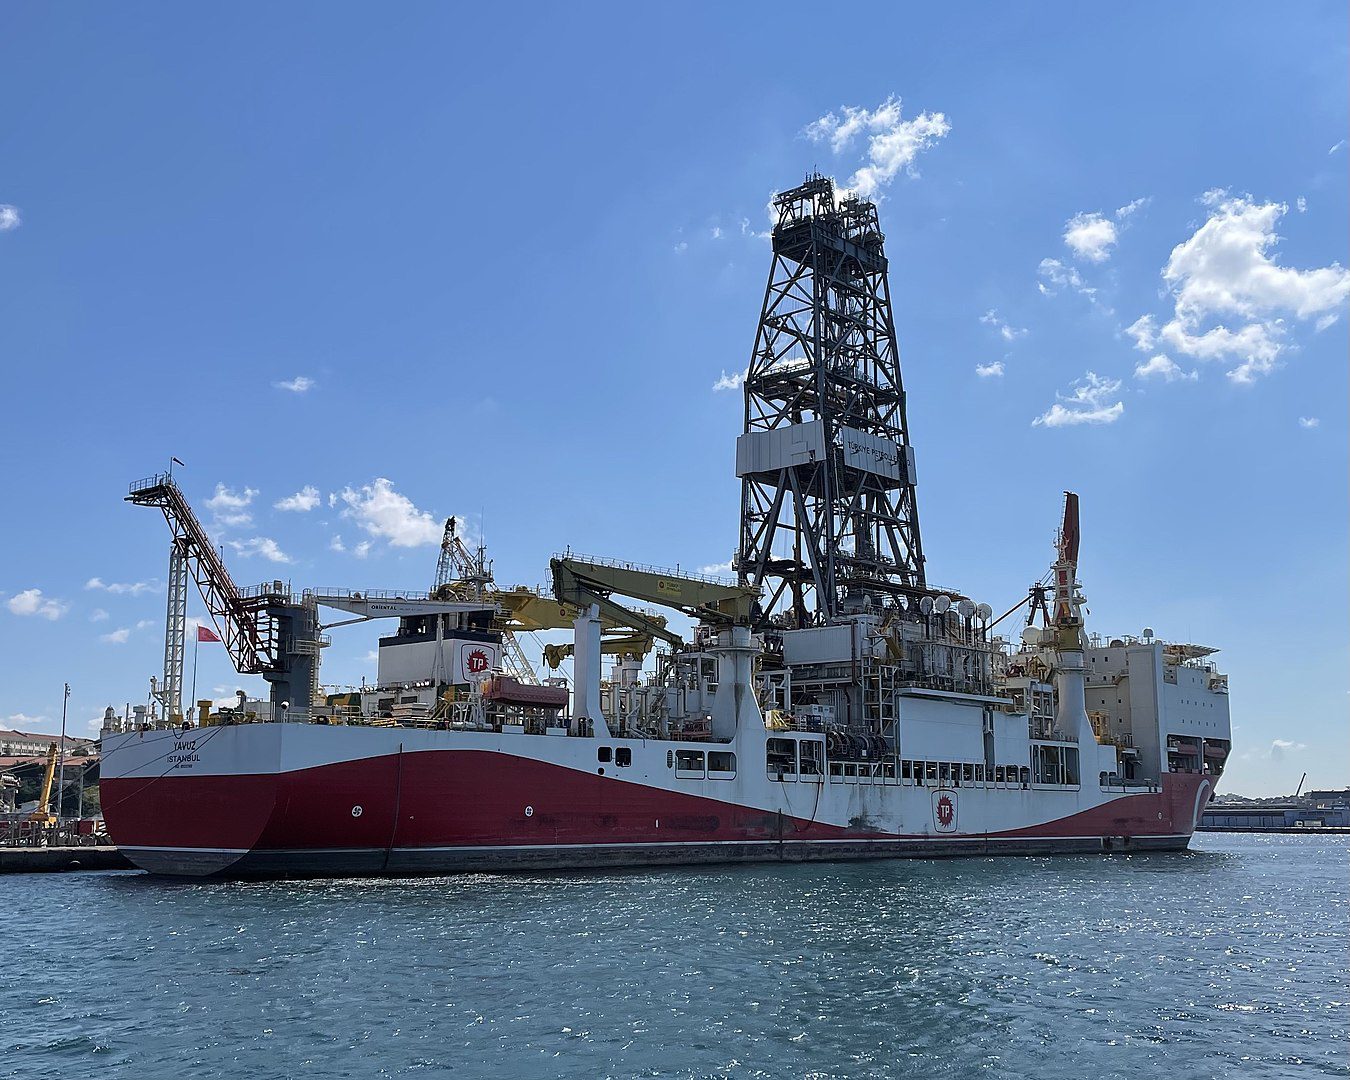 Turkey buys 4th drillship for hydrocarbon activities